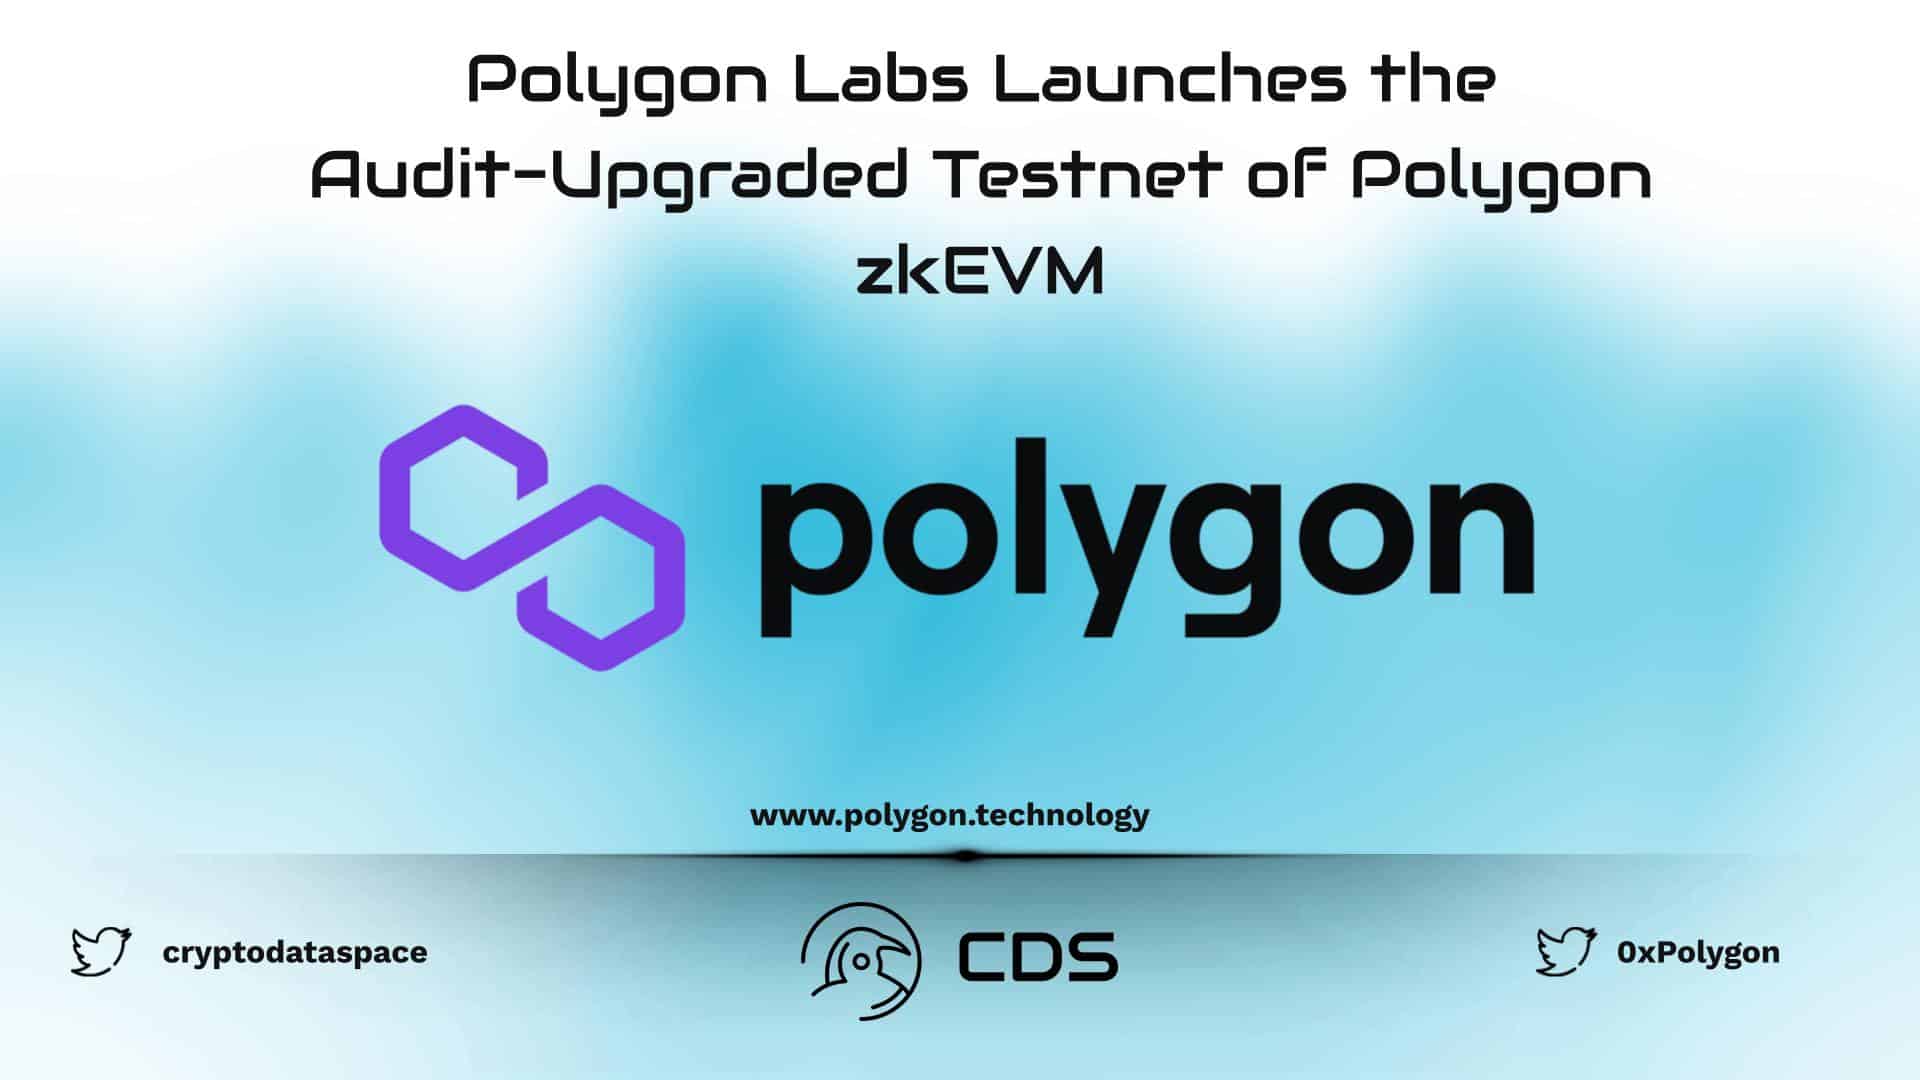 Polygon Labs Launches the Audit-Upgraded Testnet of Polygon zkEVM